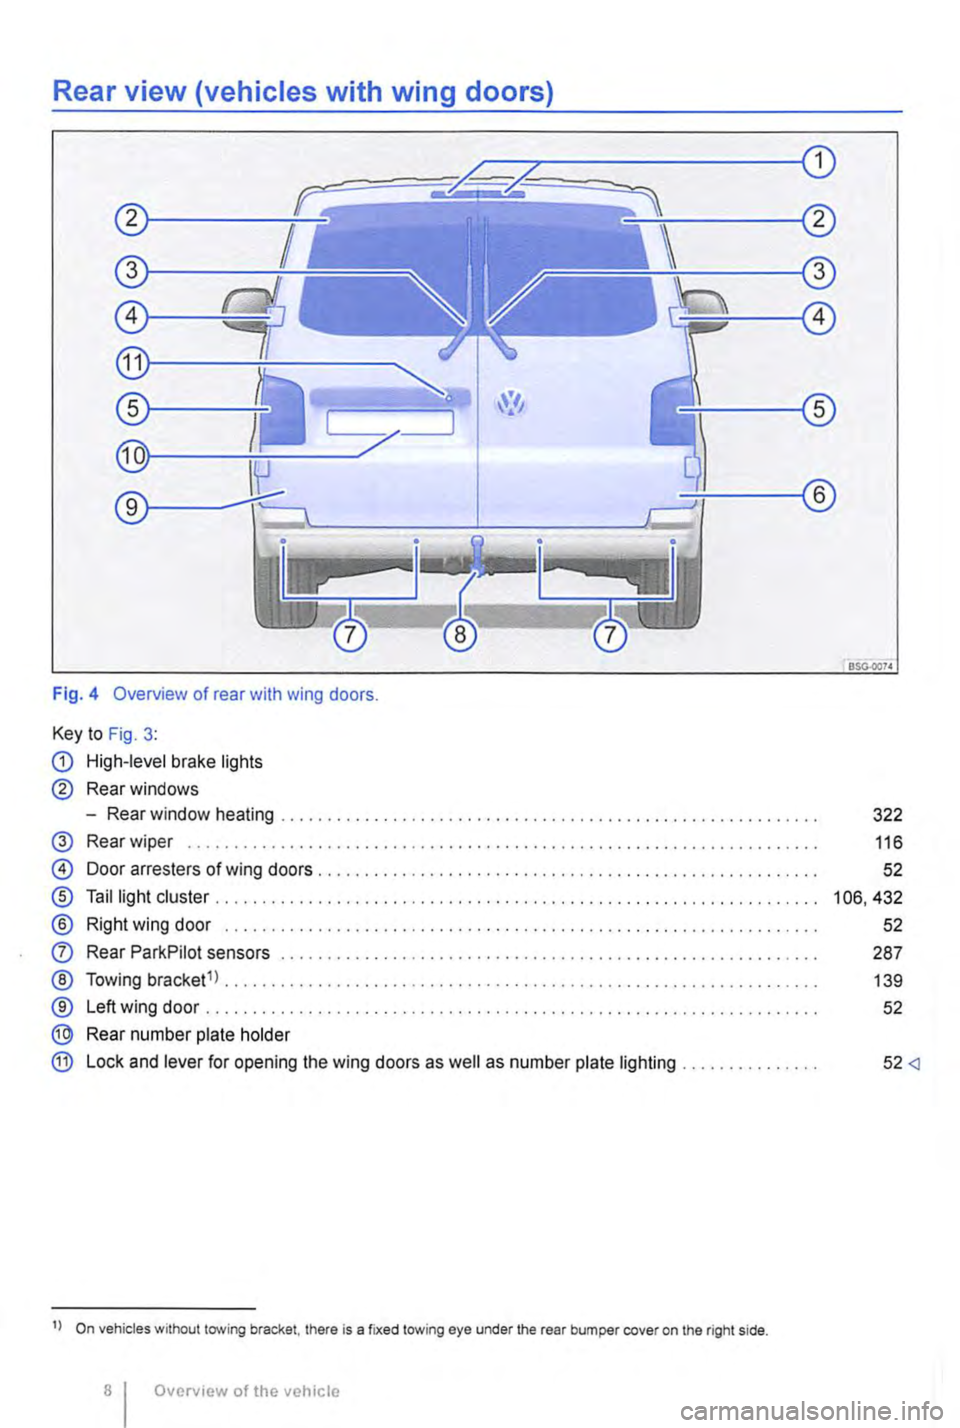 VOLKSWAGEN TRANSPORTER 2019  Owners Manual Rear view (vehicles with wing doors) 
Fig. 4 Overview of rear with wing doors. 
Key to Fig. 3: 
G) High-level brake lights 
® Rear windows 
-Rear window heating ......................................